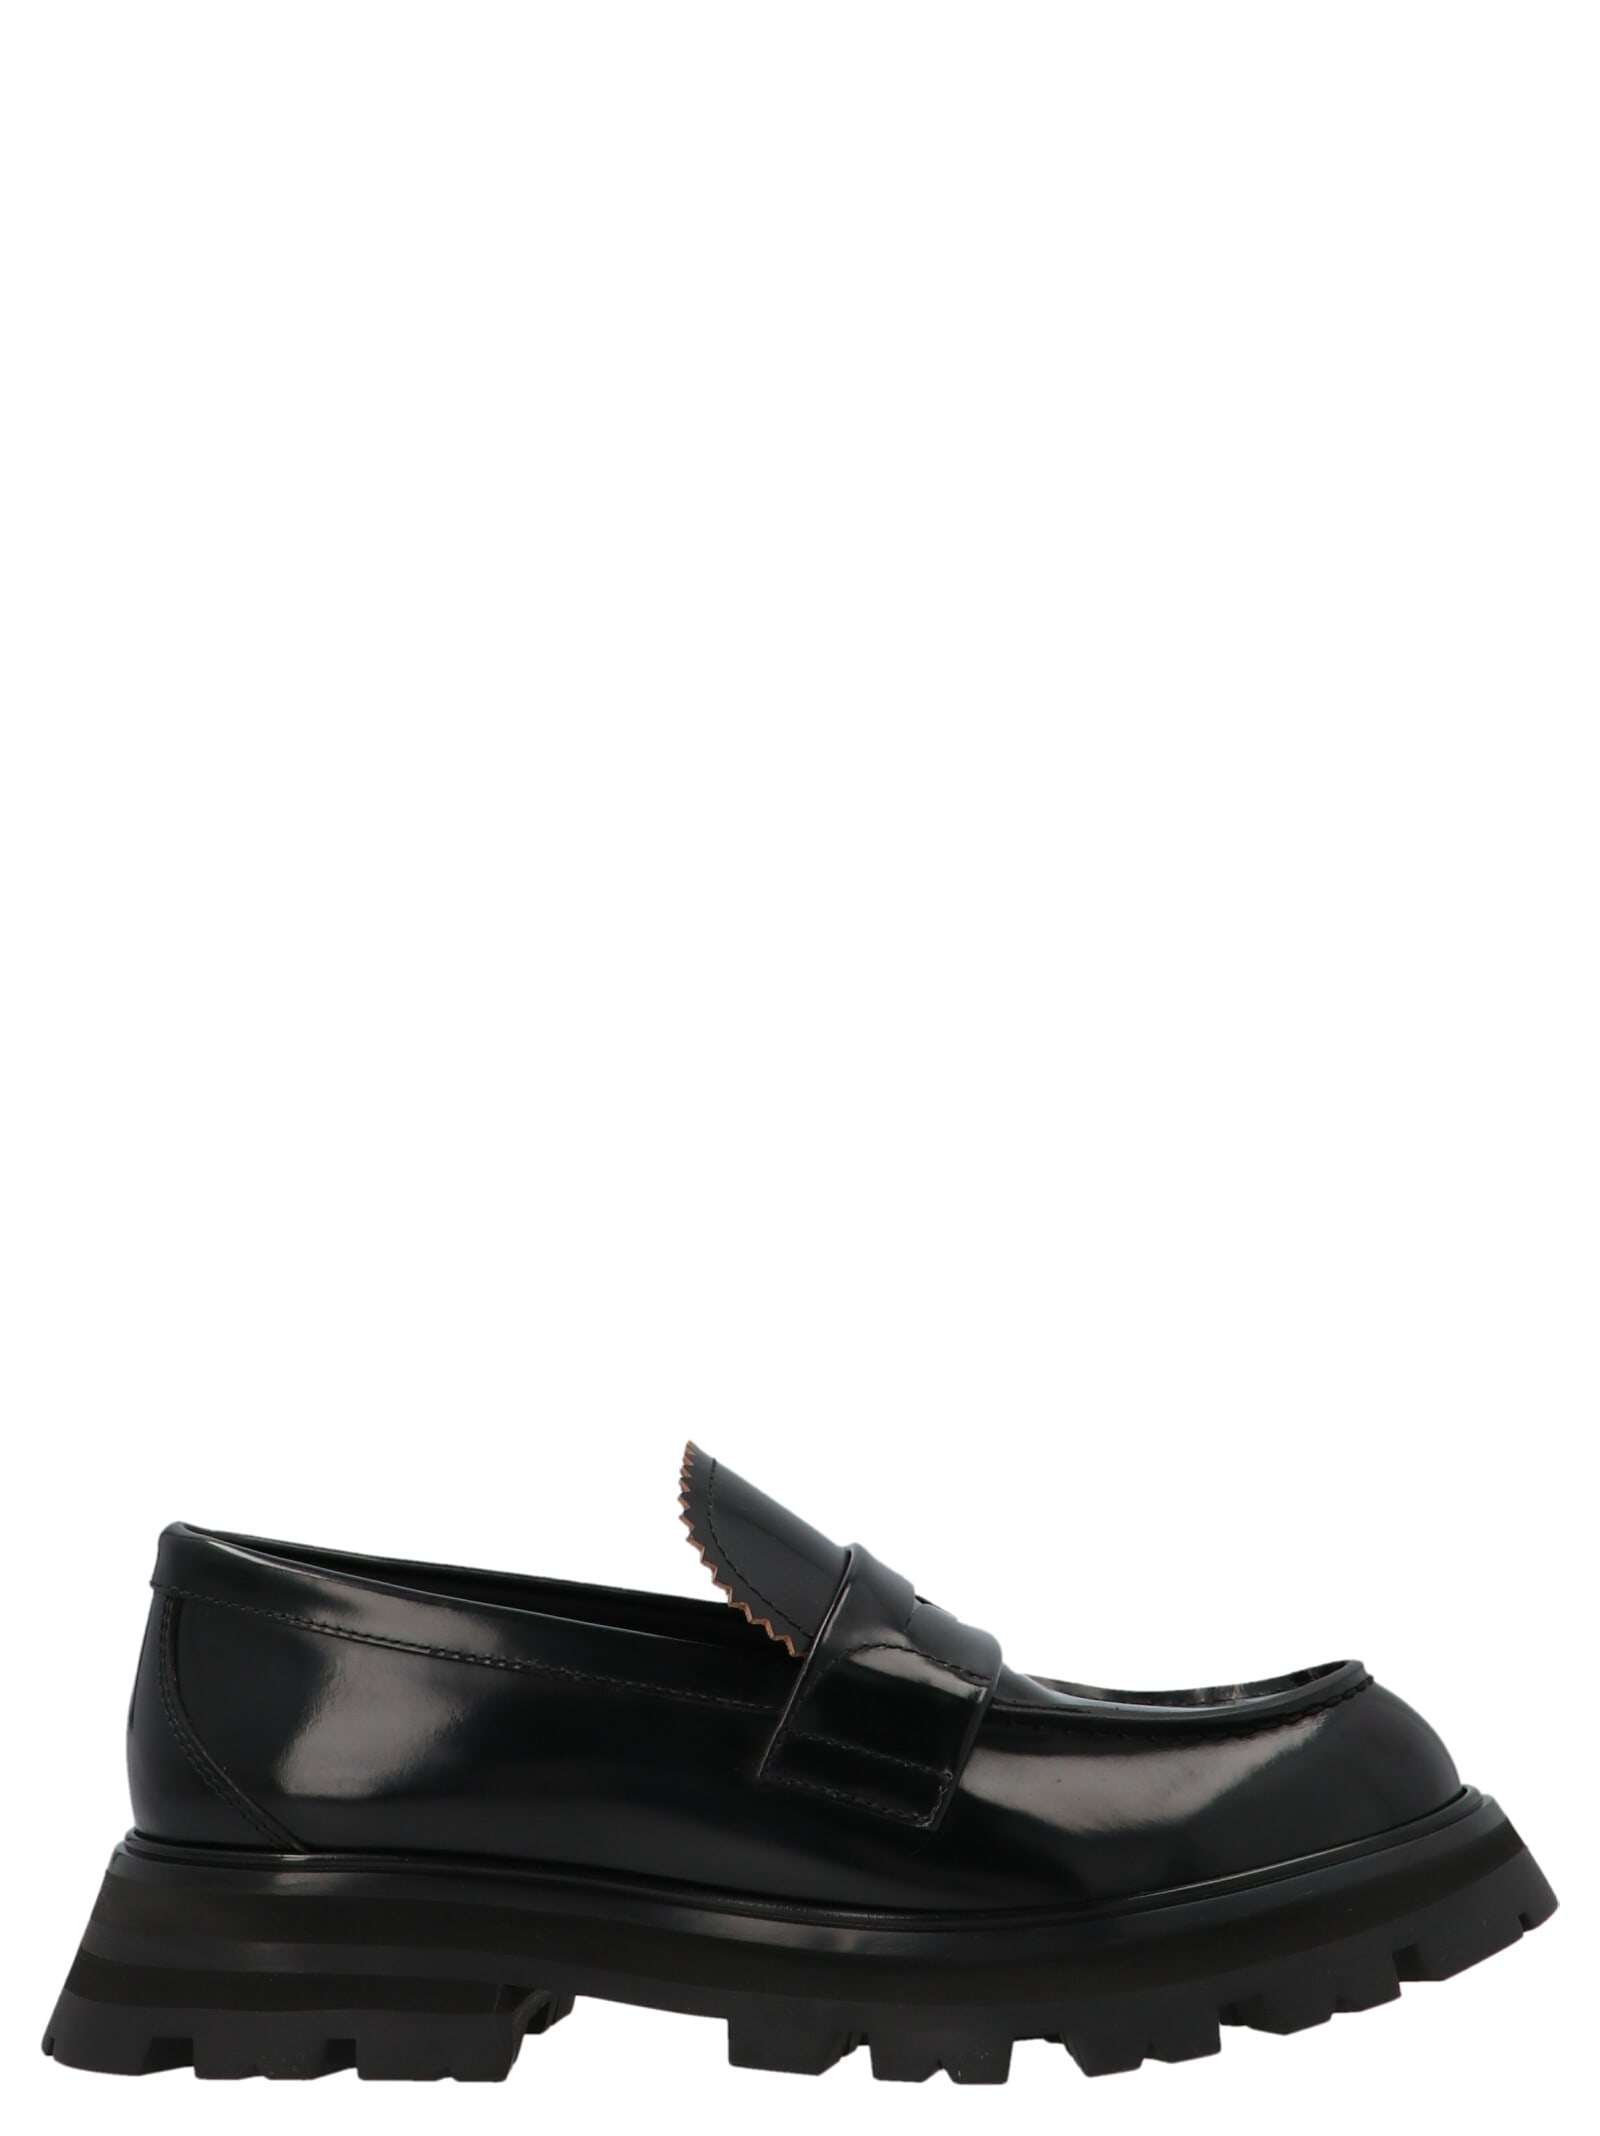 Wander Leather Loafers